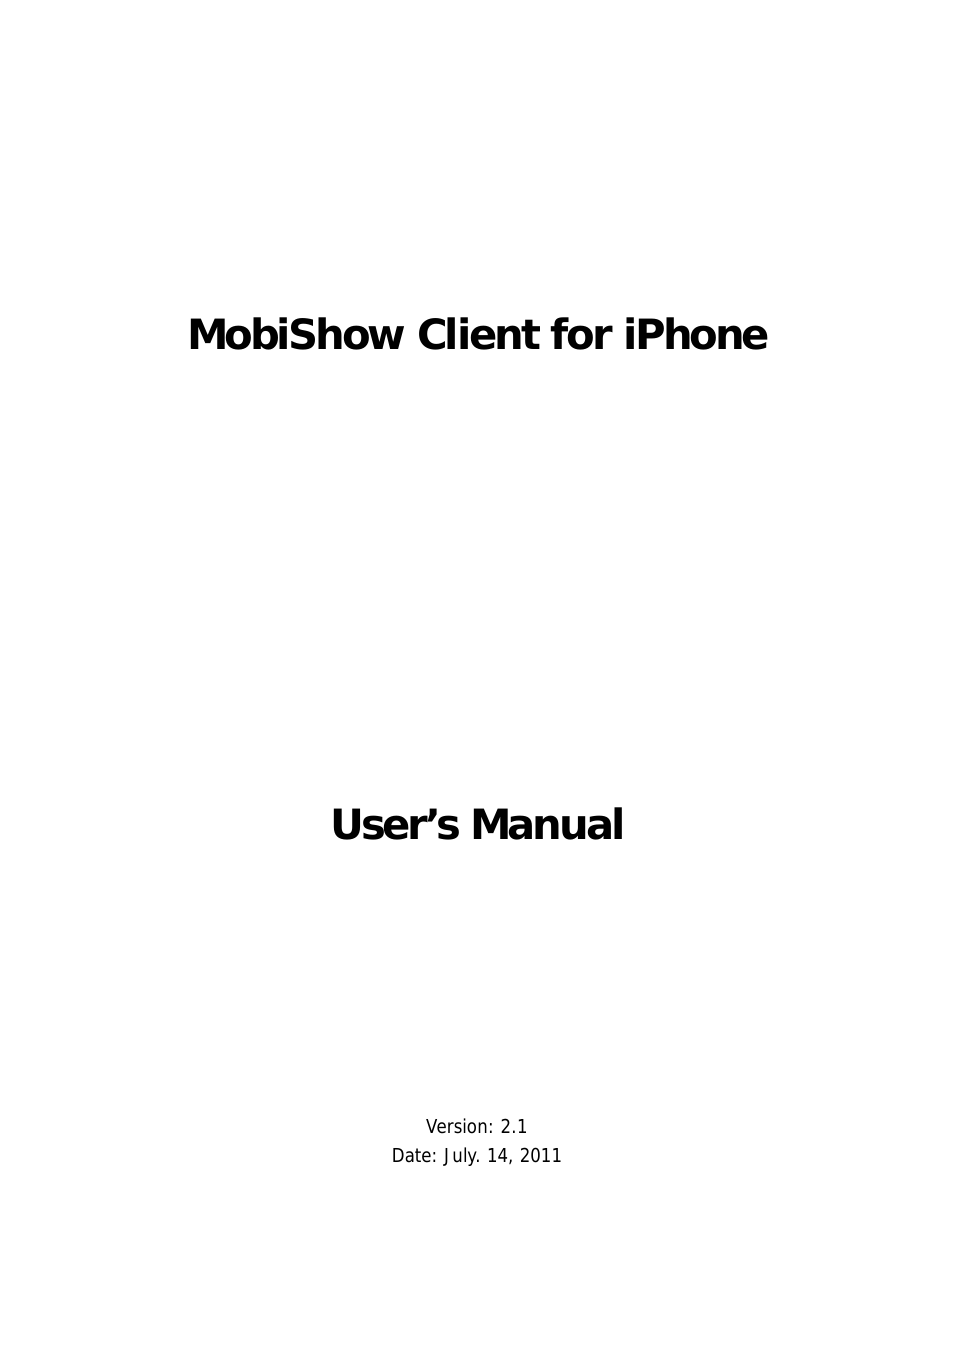 MobiShow User's Manual for iPhone